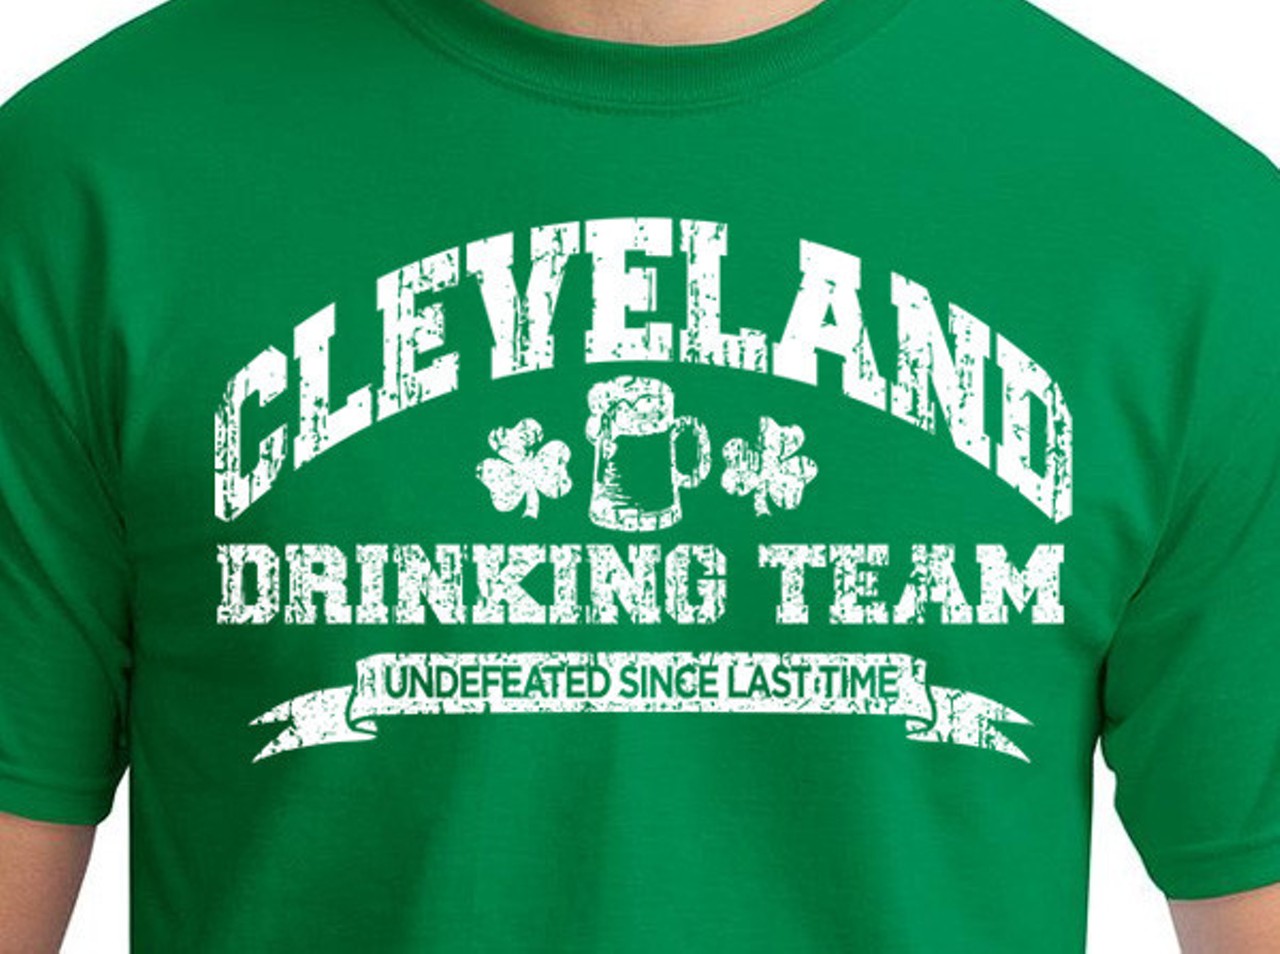 Because we like to drink. A lot. Shirt by Just One T-Shirts.